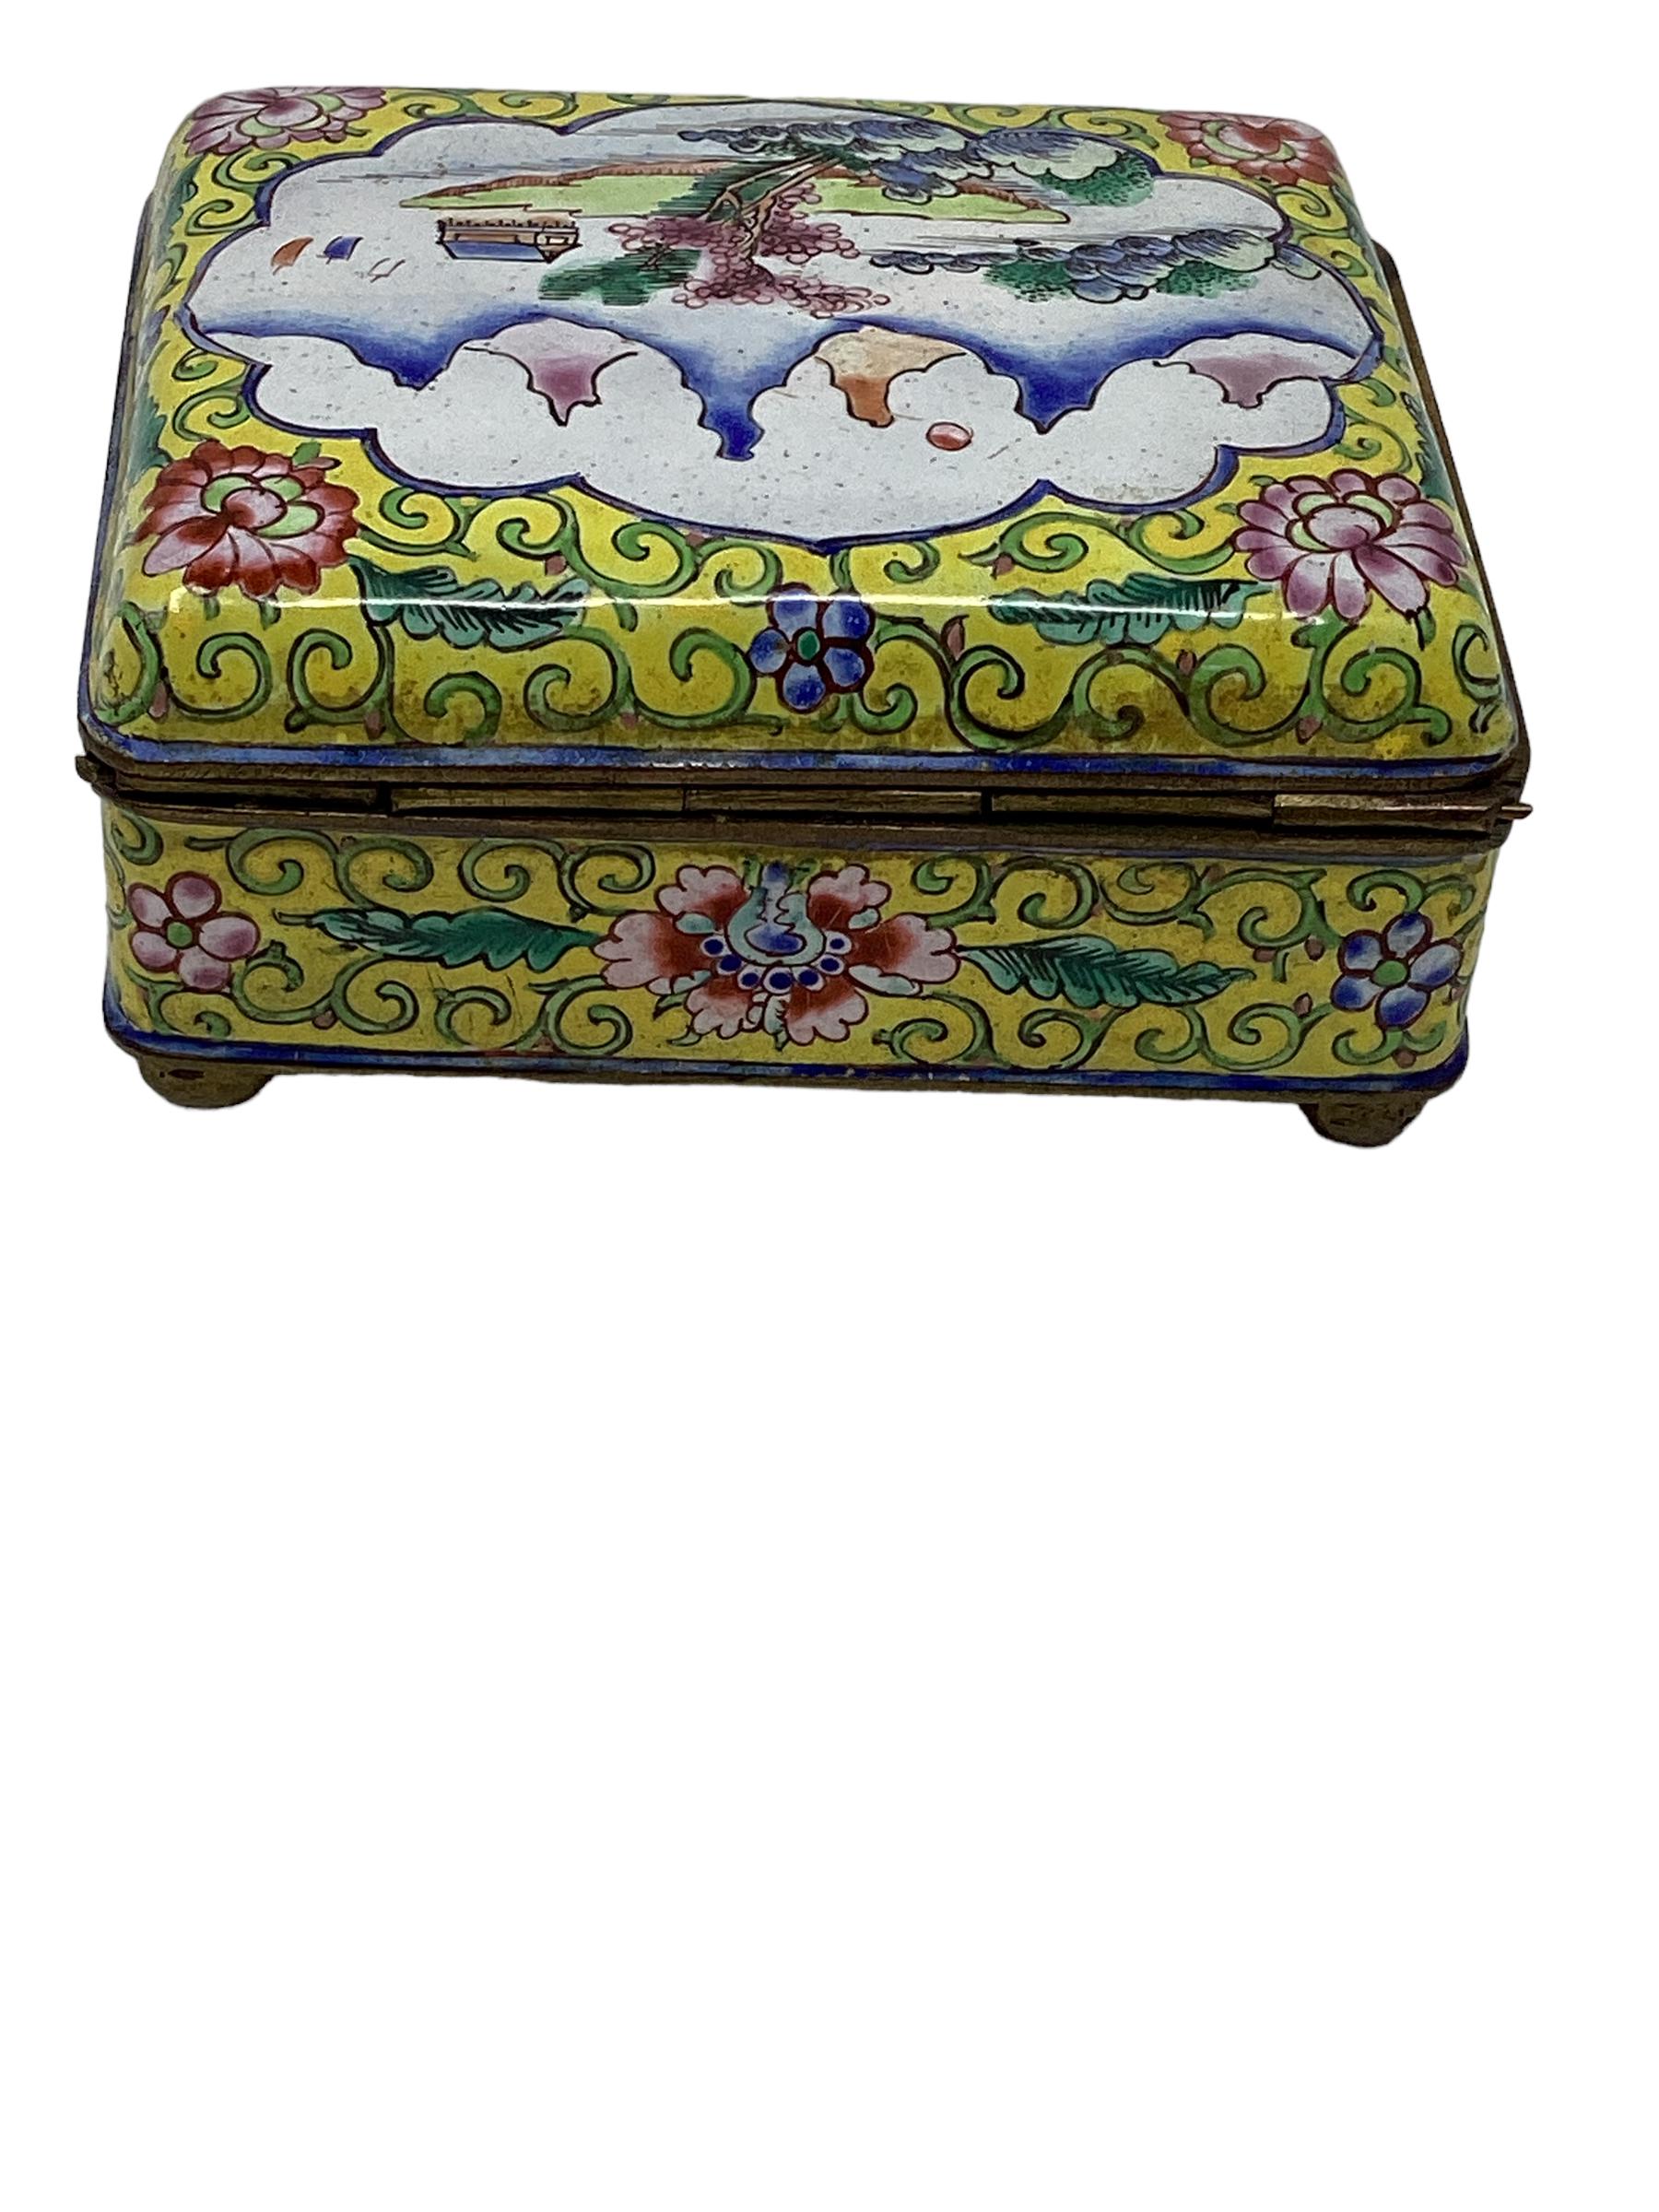 Chinoiserie Chinese Export Cloisonné Box For Sale